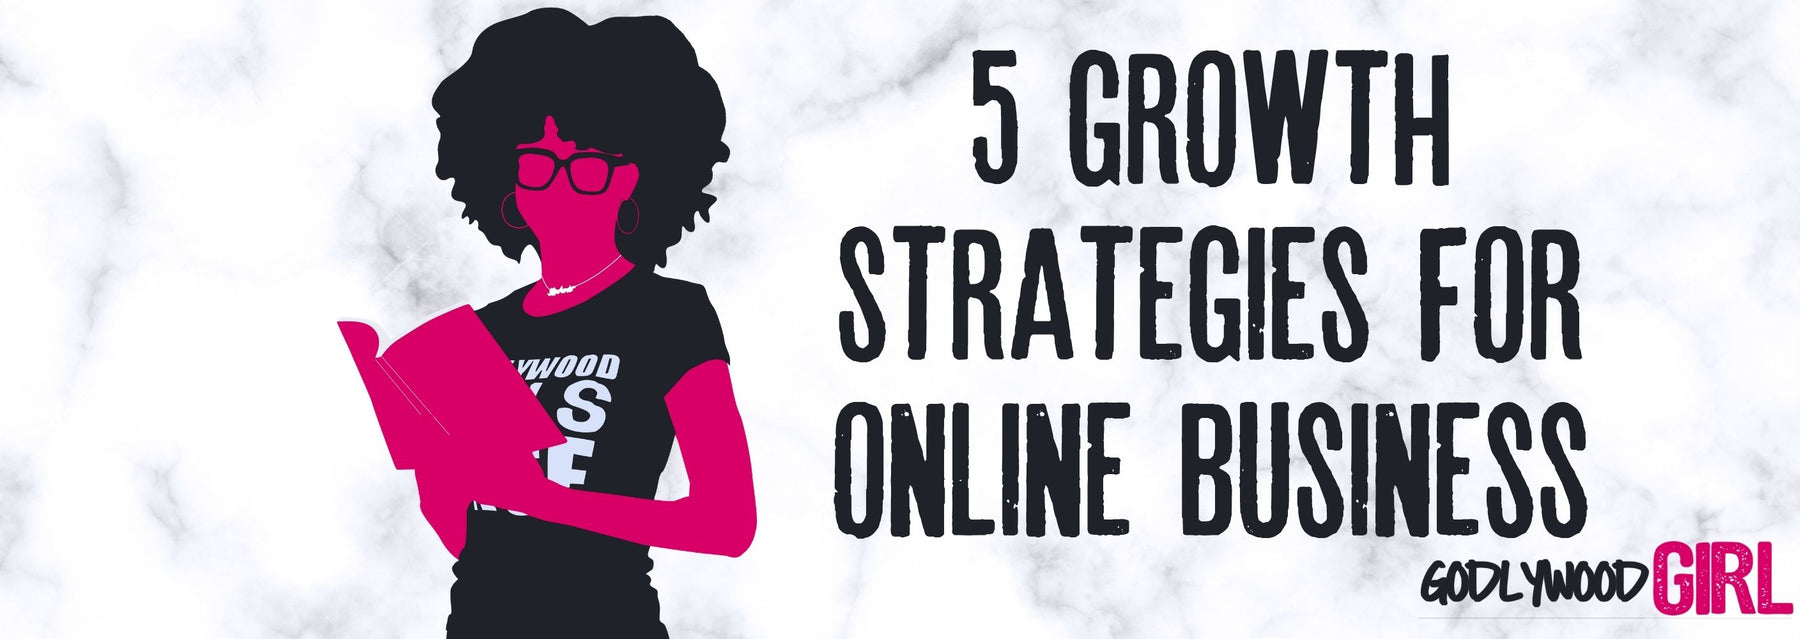 GROW YOUR BUSINESS AS A FEMALE ENTREPRENEUR | 5 Things That Will Grow Your Business Online